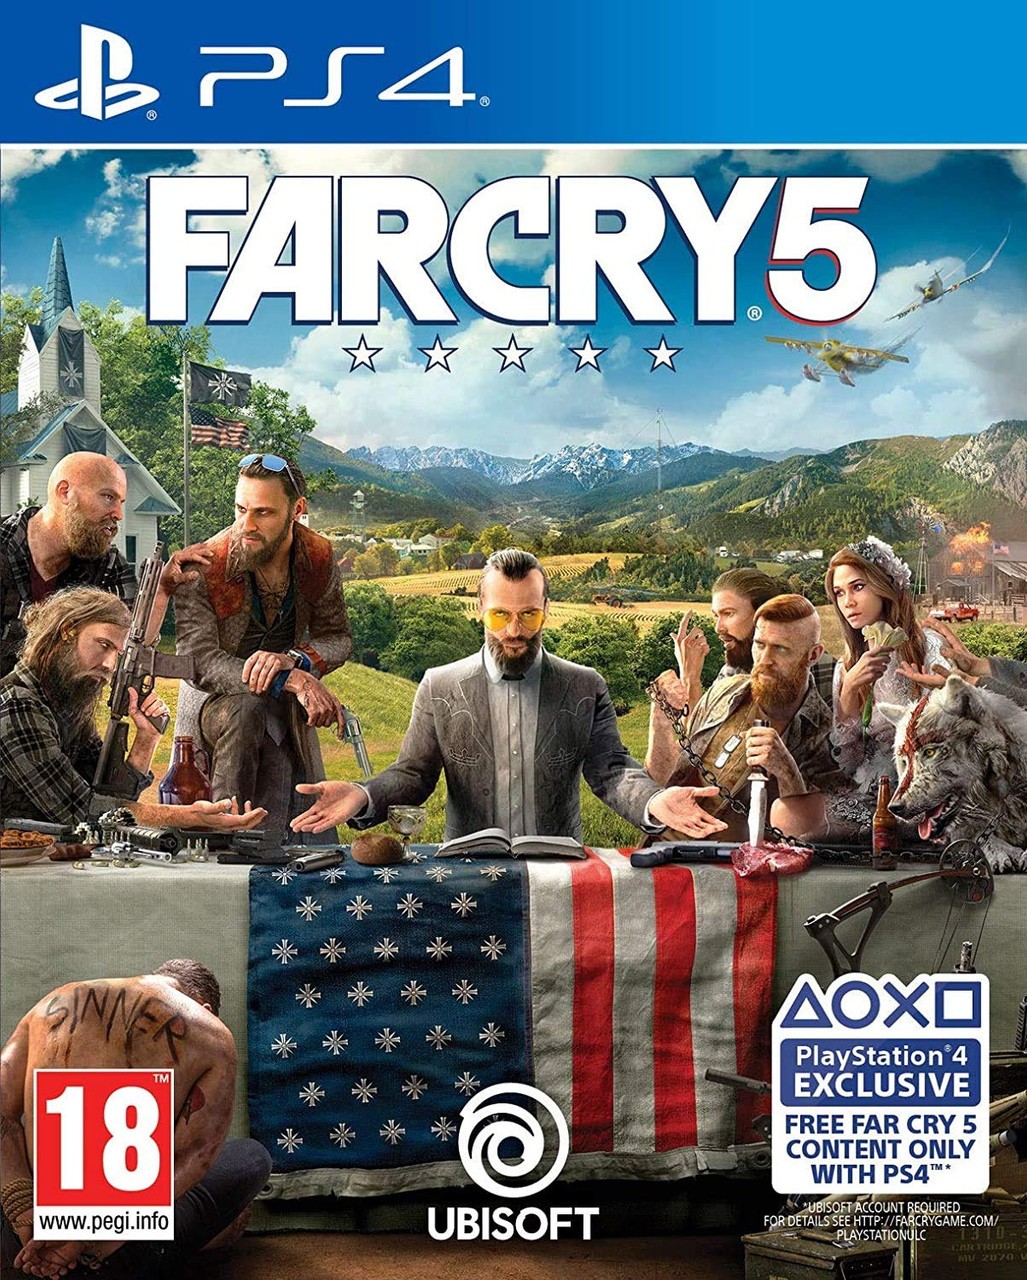 CD PS4 Farcry 5